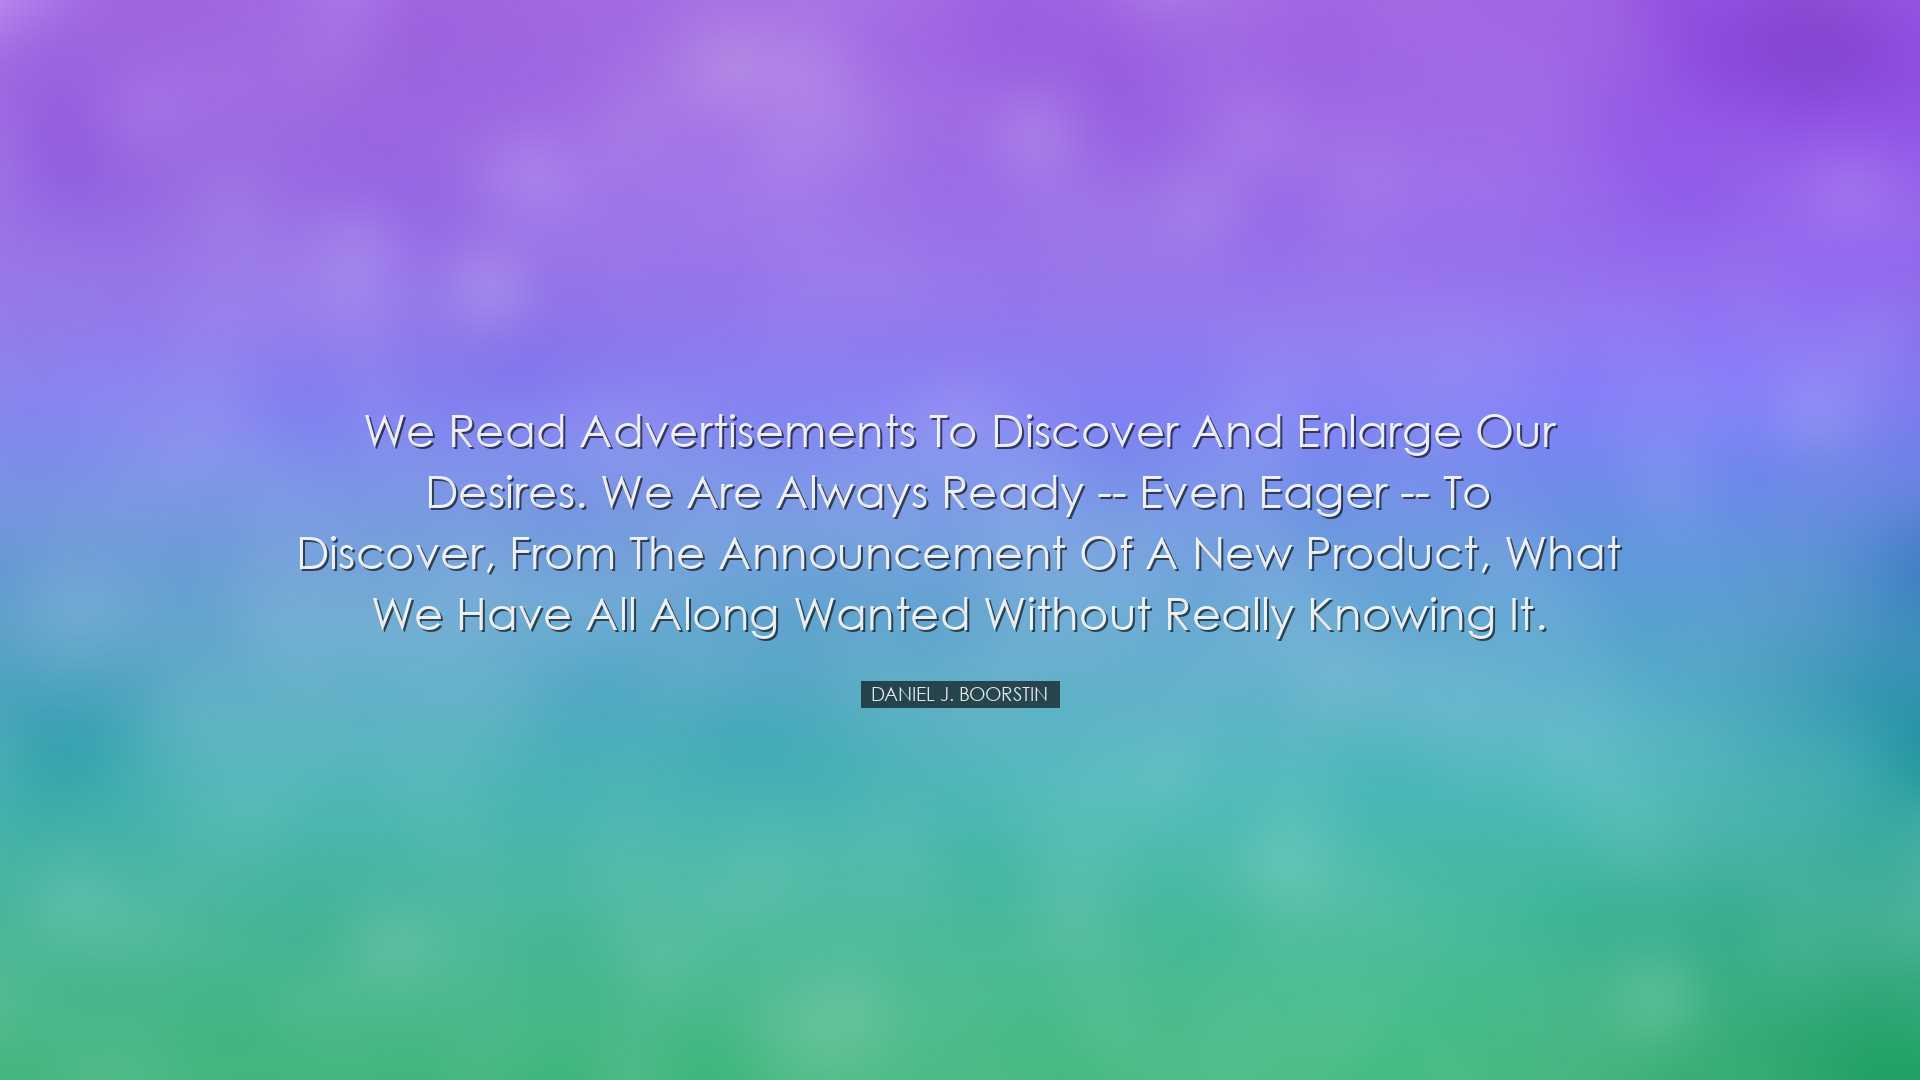 We read advertisements to discover and enlarge our desires. We are